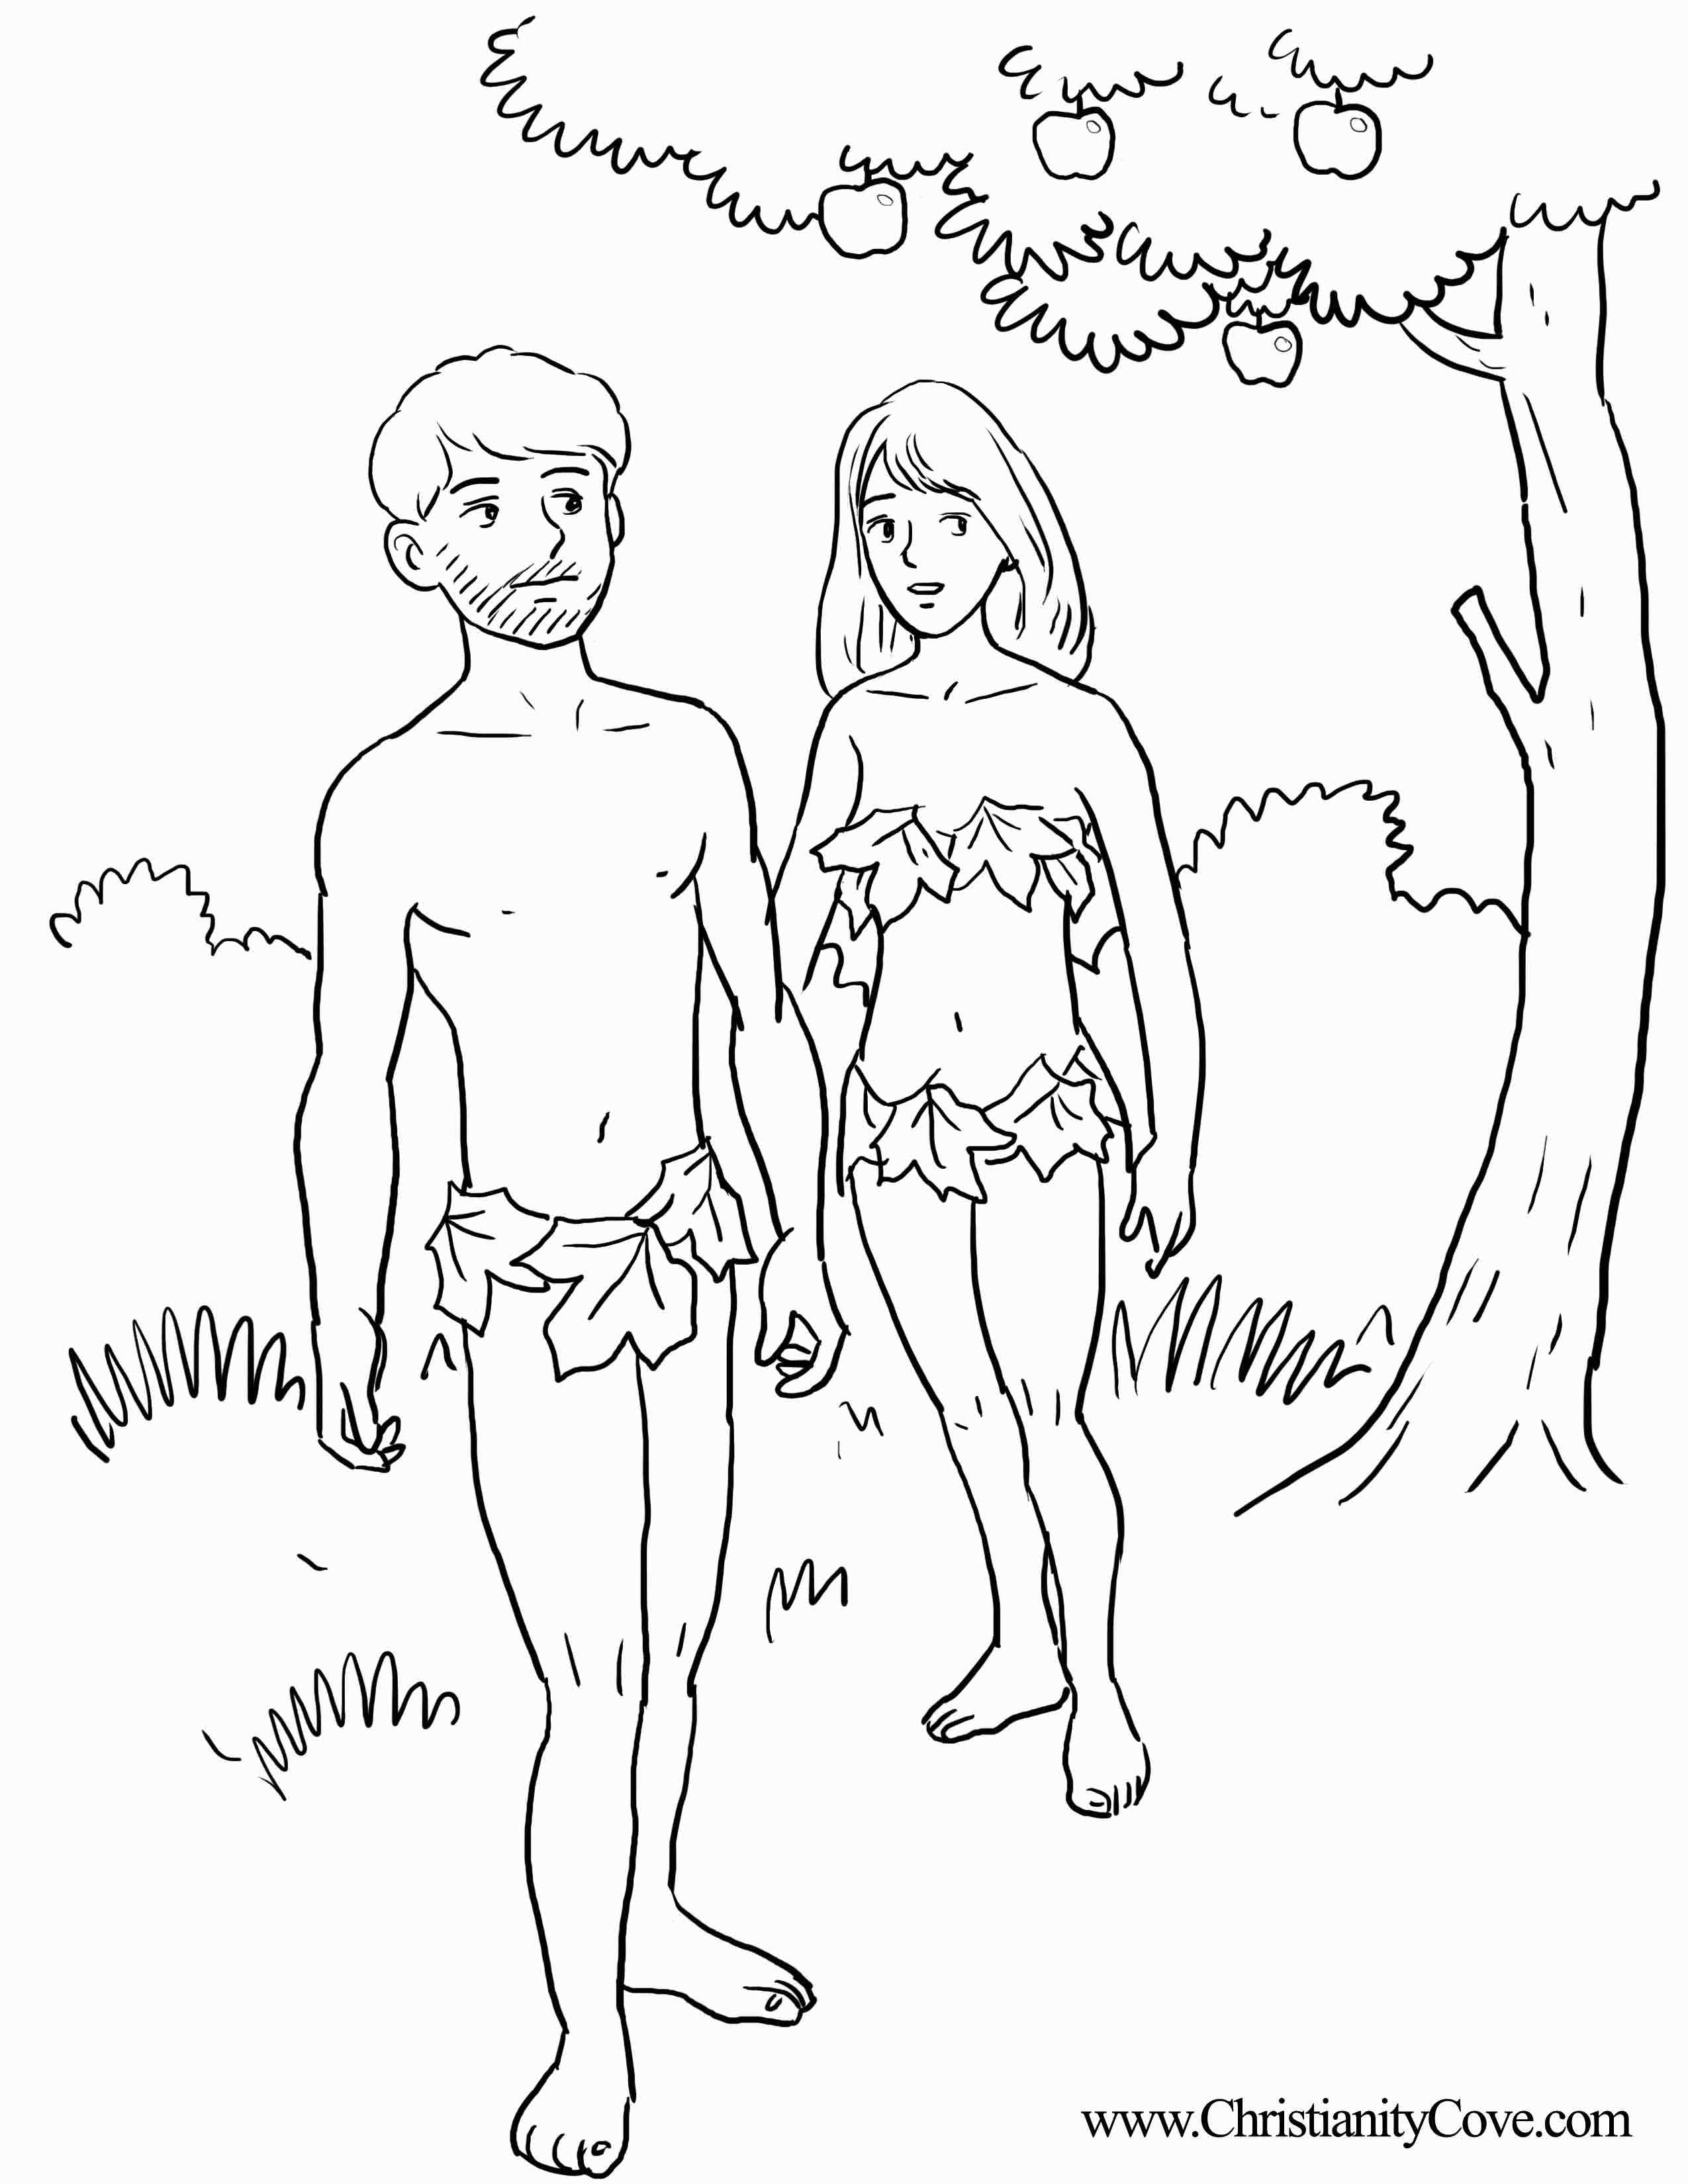 Clip Arts Related To : adam and eve snake drawing. view all Bible Story Ada...